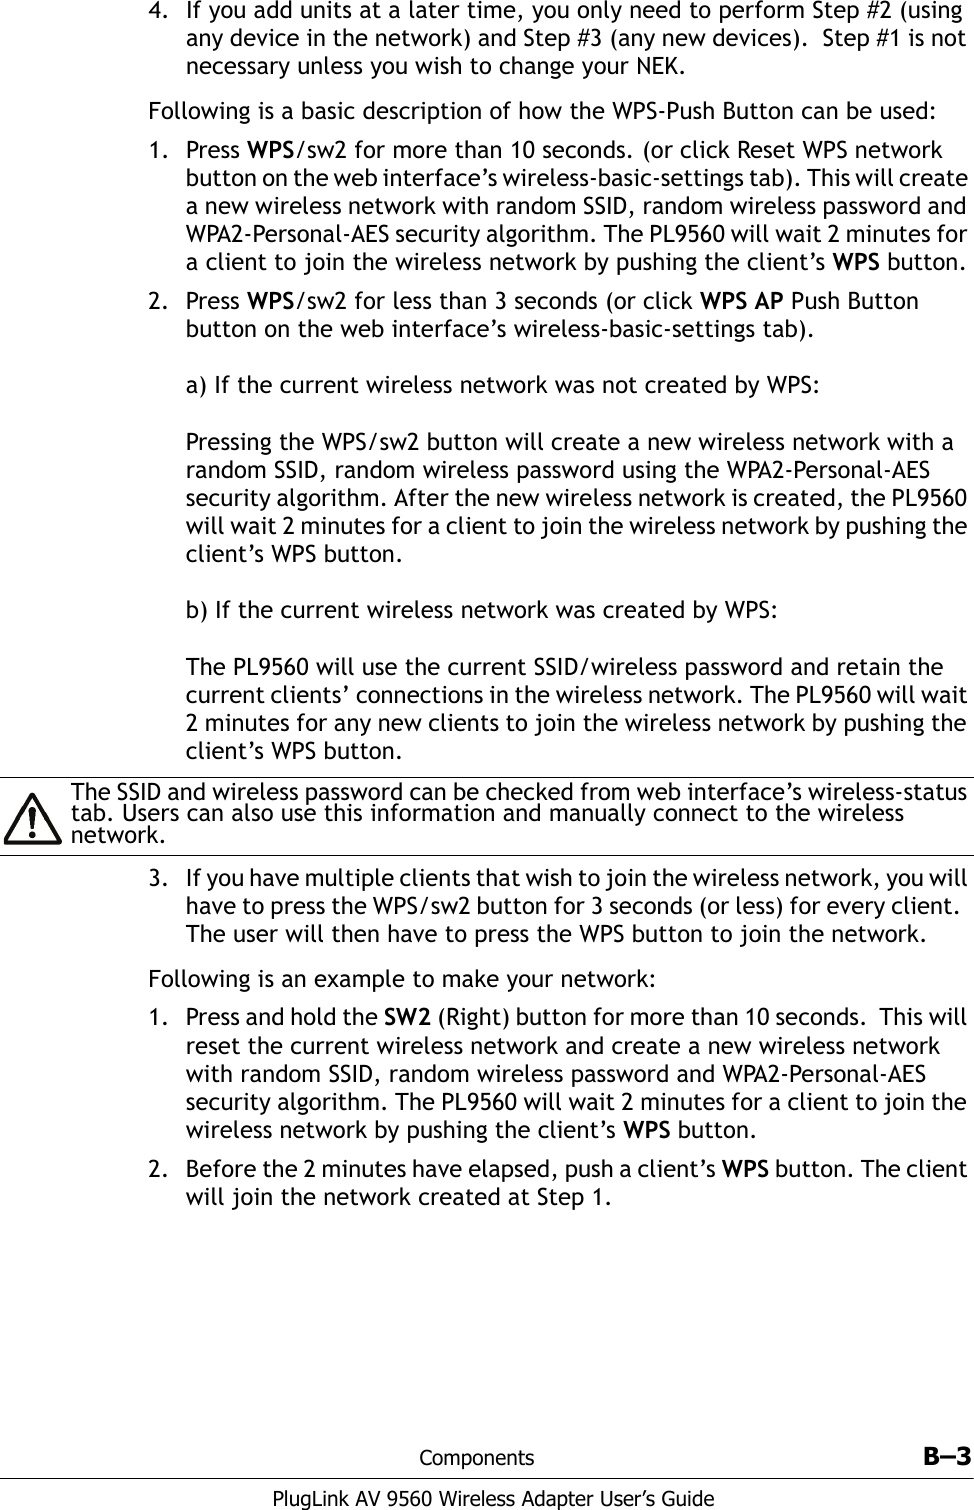 Components B–3PlugLink AV 9560 Wireless Adapter User’s Guide4. If you add units at a later time, you only need to perform Step #2 (using any device in the network) and Step #3 (any new devices).  Step #1 is not necessary unless you wish to change your NEK.Following is a basic description of how the WPS-Push Button can be used: 1. Press WPS/sw2 for more than 10 seconds. (or click Reset WPS network button on the web interface’s wireless-basic-settings tab). This will create a new wireless network with random SSID, random wireless password and WPA2-Personal-AES security algorithm. The PL9560 will wait 2 minutes for a client to join the wireless network by pushing the client’s WPS button.2. Press WPS/sw2 for less than 3 seconds (or click WPS AP Push Button button on the web interface’s wireless-basic-settings tab).a) If the current wireless network was not created by WPS:Pressing the WPS/sw2 button will create a new wireless network with a random SSID, random wireless password using the WPA2-Personal-AES security algorithm. After the new wireless network is created, the PL9560 will wait 2 minutes for a client to join the wireless network by pushing the client’s WPS button.b) If the current wireless network was created by WPS:The PL9560 will use the current SSID/wireless password and retain the current clients’ connections in the wireless network. The PL9560 will wait 2 minutes for any new clients to join the wireless network by pushing the client’s WPS button. 3. If you have multiple clients that wish to join the wireless network, you will have to press the WPS/sw2 button for 3 seconds (or less) for every client.  The user will then have to press the WPS button to join the network. Following is an example to make your network:1. Press and hold the SW2 (Right) button for more than 10 seconds.  This will reset the current wireless network and create a new wireless network with random SSID, random wireless password and WPA2-Personal-AES security algorithm. The PL9560 will wait 2 minutes for a client to join the wireless network by pushing the client’s WPS button. 2. Before the 2 minutes have elapsed, push a client’s WPS button. The client will join the network created at Step 1. The SSID and wireless password can be checked from web interface’s wireless-status tab. Users can also use this information and manually connect to the wireless network.